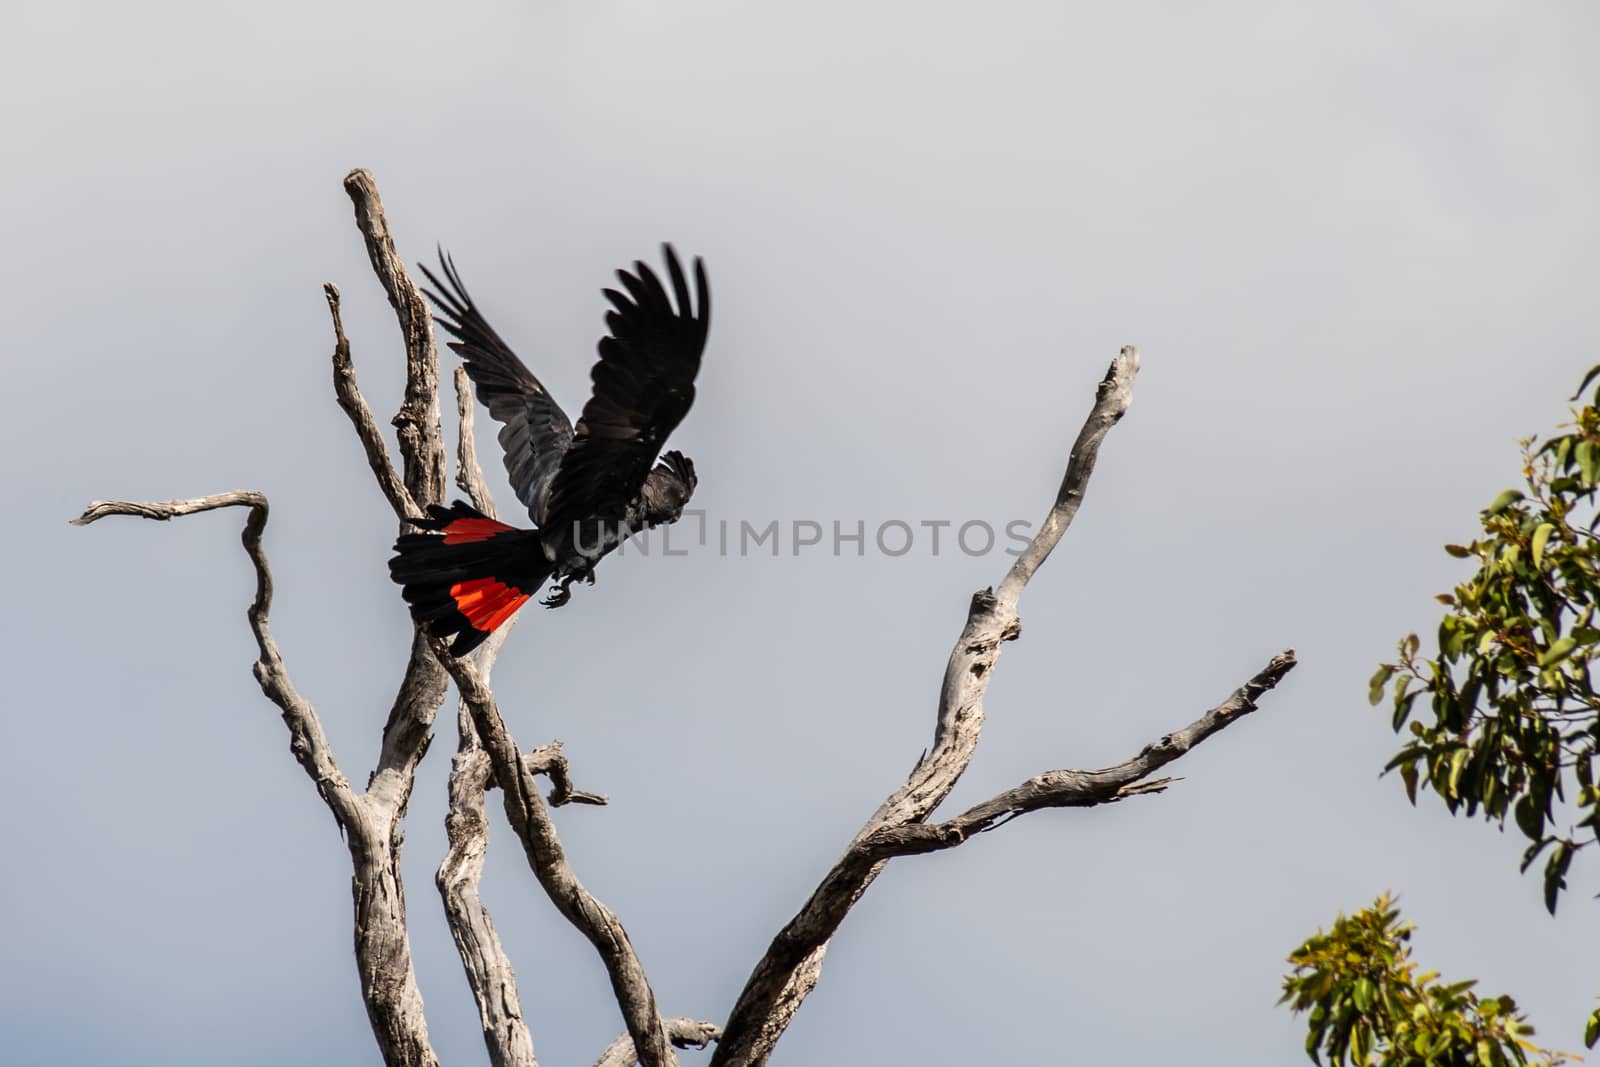 Red tailed Black Cockatoo calyphtorhynchus Baksii in Avon Valley National Park by MXW_Stock